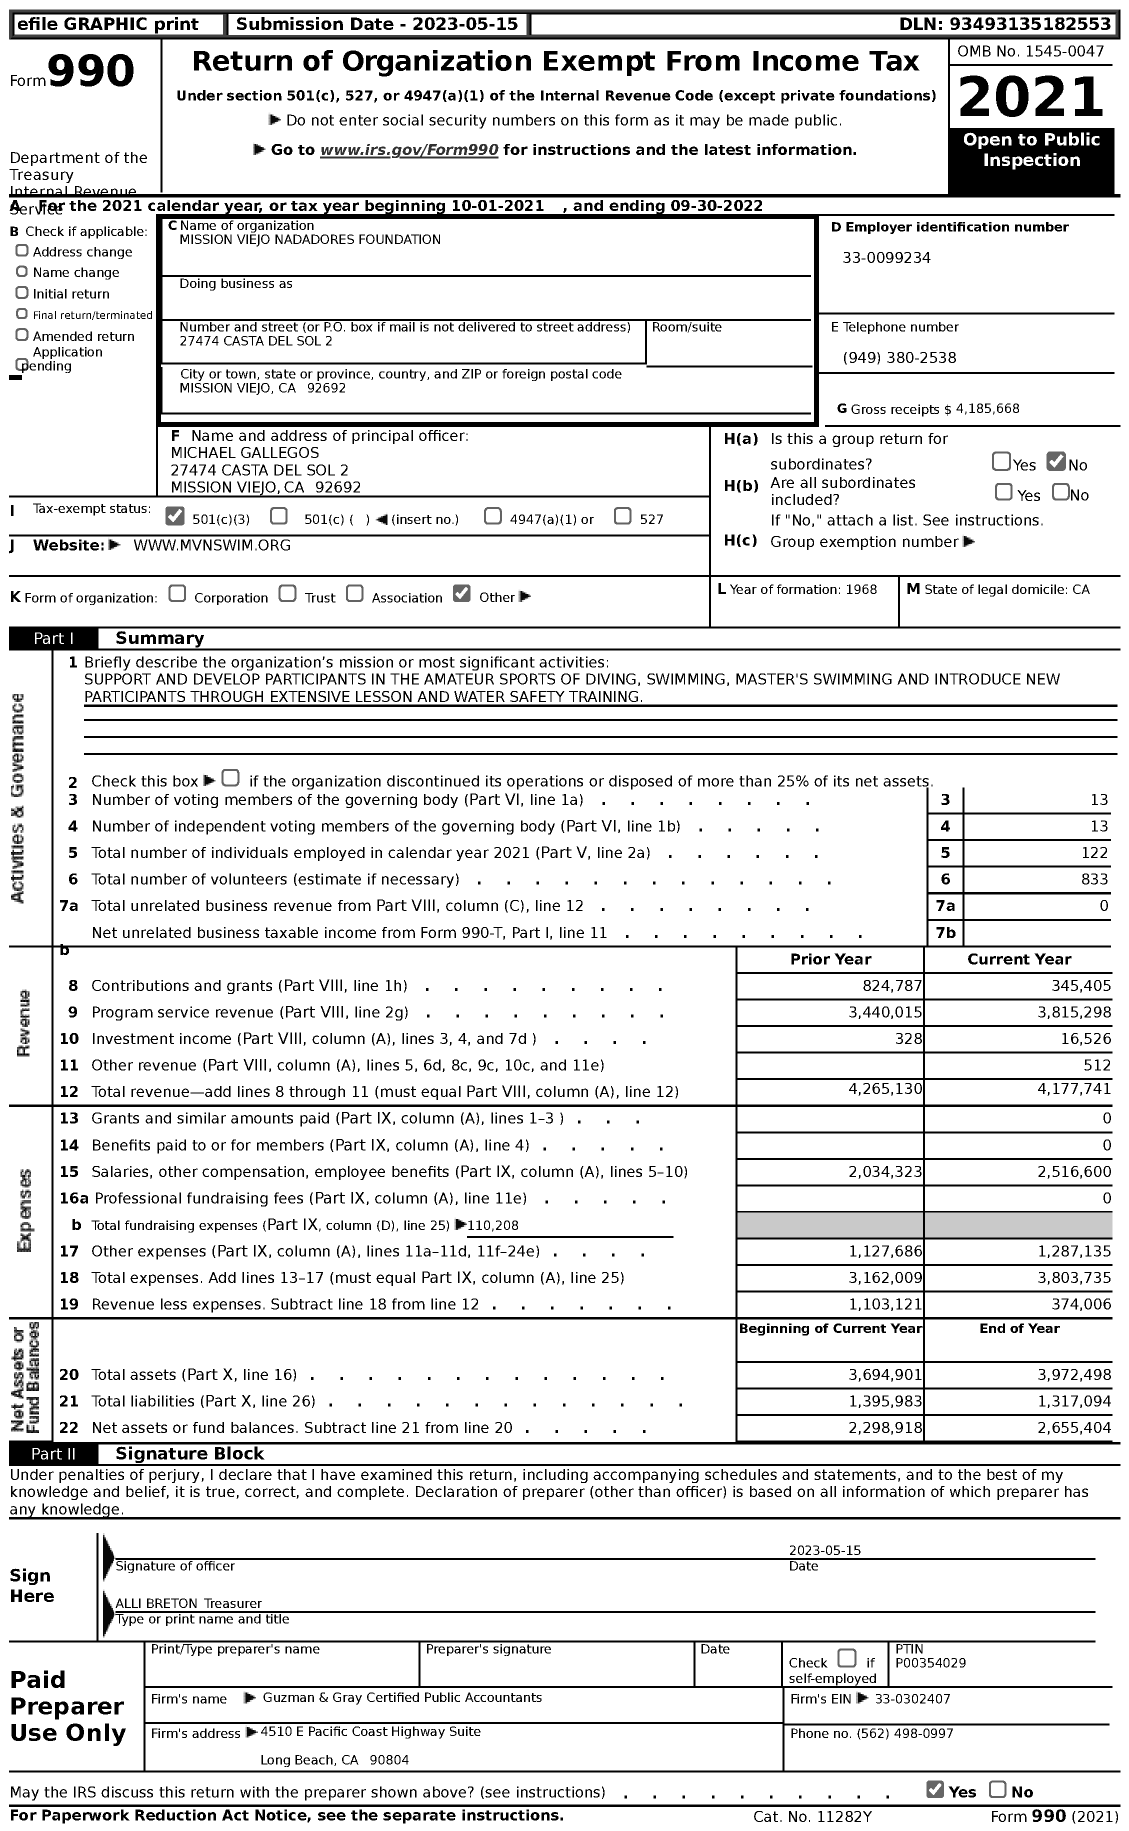 Image of first page of 2021 Form 990 for Mission Viejo Nadadores Foundation (MVN)